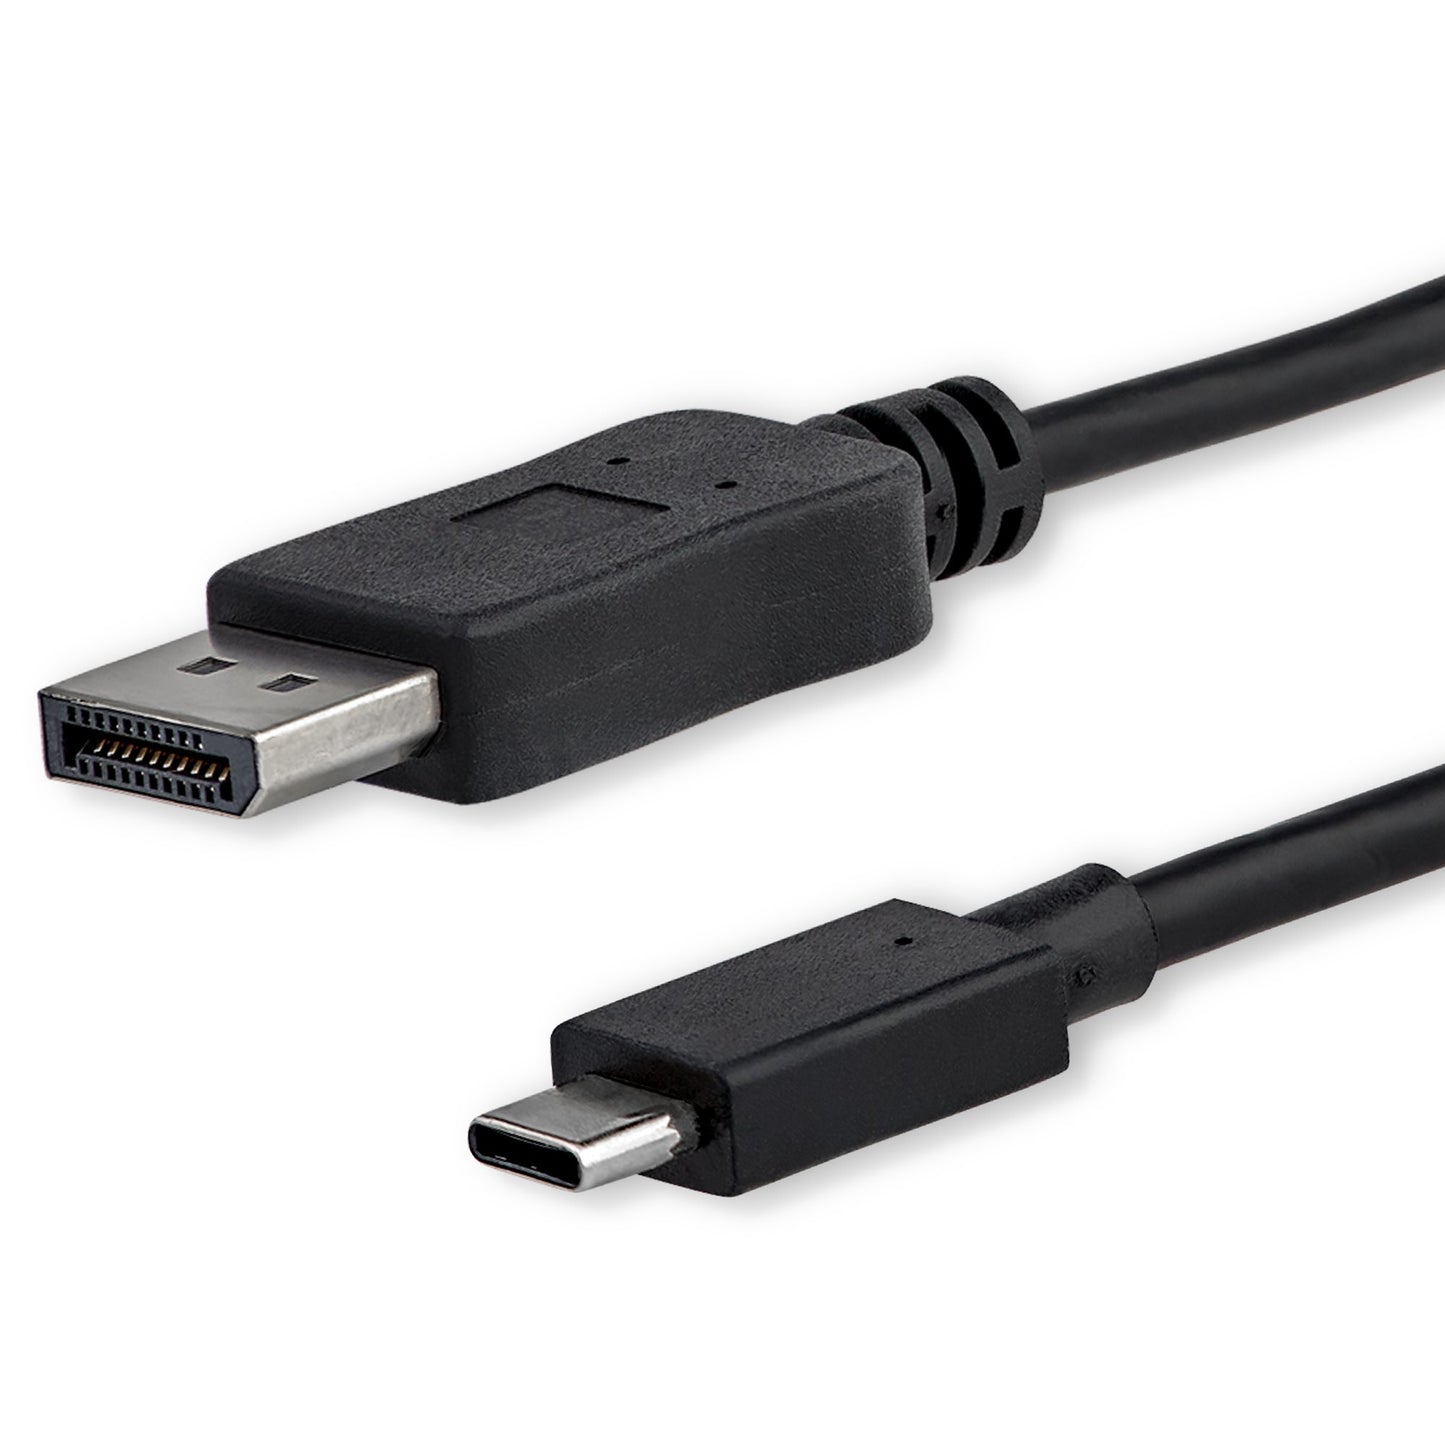 StarTech.com 3ft/1m USB C to DisplayPort 1.2 Cable 4K 60Hz - USB-C to DisplayPort Adapter Cable - HBR2 - USB Type-C DP Alt Mode to DP Monitor Video Cable - Works w/ Thunderbolt 3 - Black-0